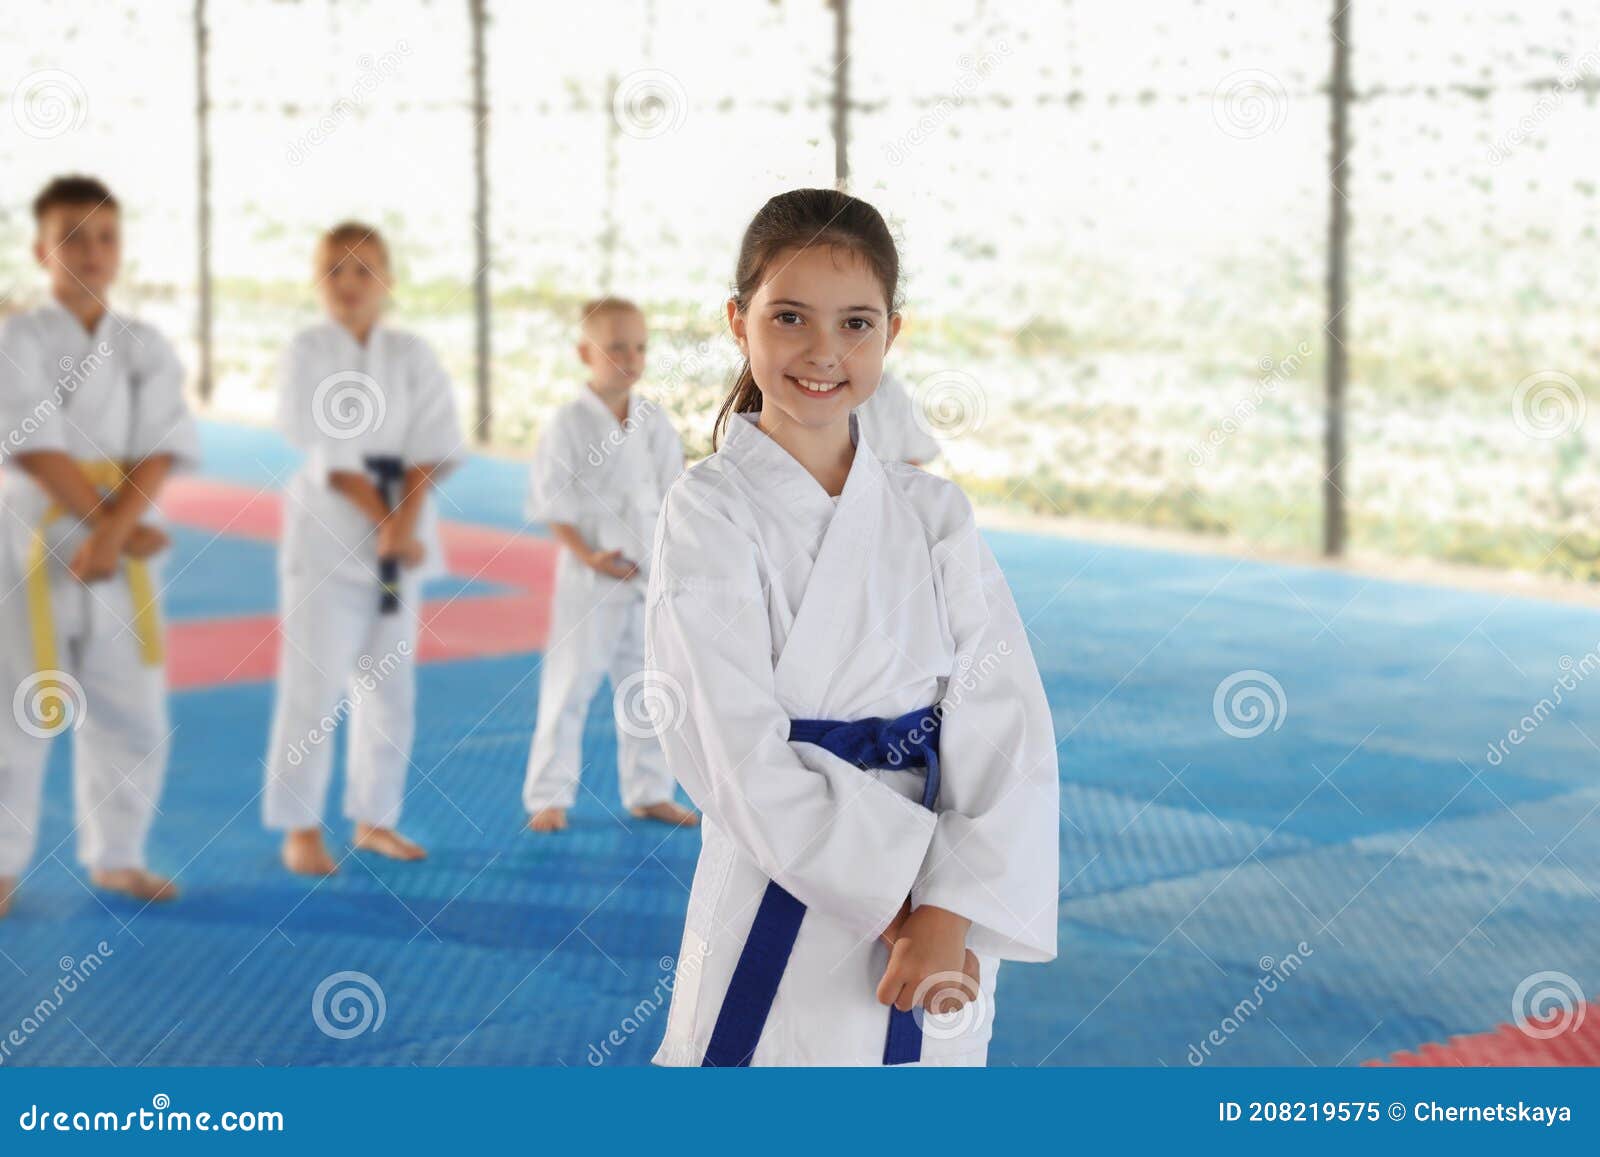 Girl In Kimono During Karate Practice On Tatami Outdoors Stock Image Image Of Lifestyle